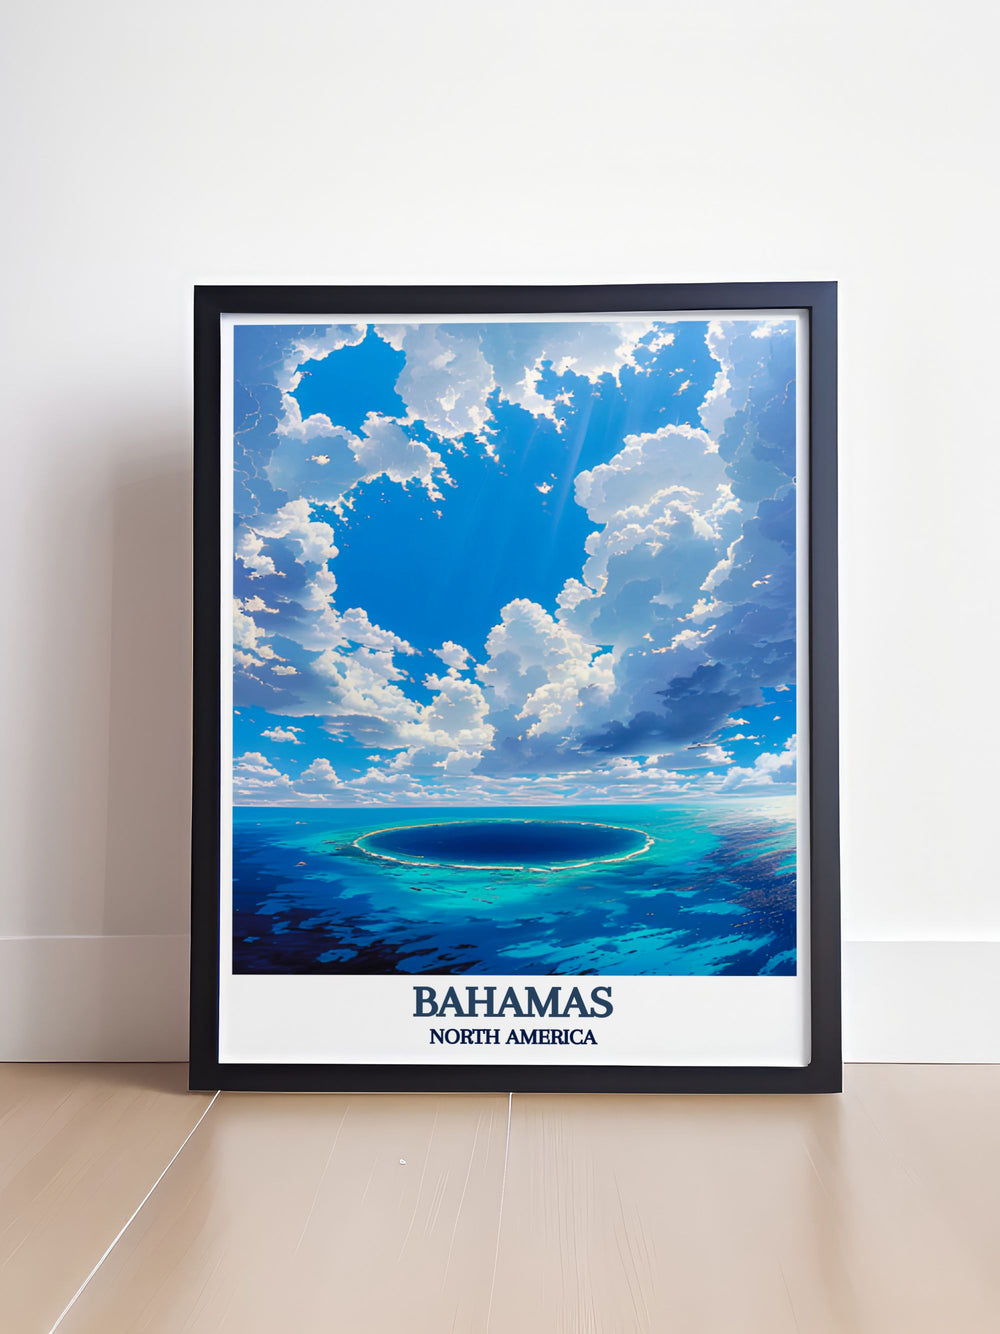 Canvas art of the Bahama Blue Hole surrounded by lush tropical foliage, creating a peaceful and inviting ambiance in your home or office space.